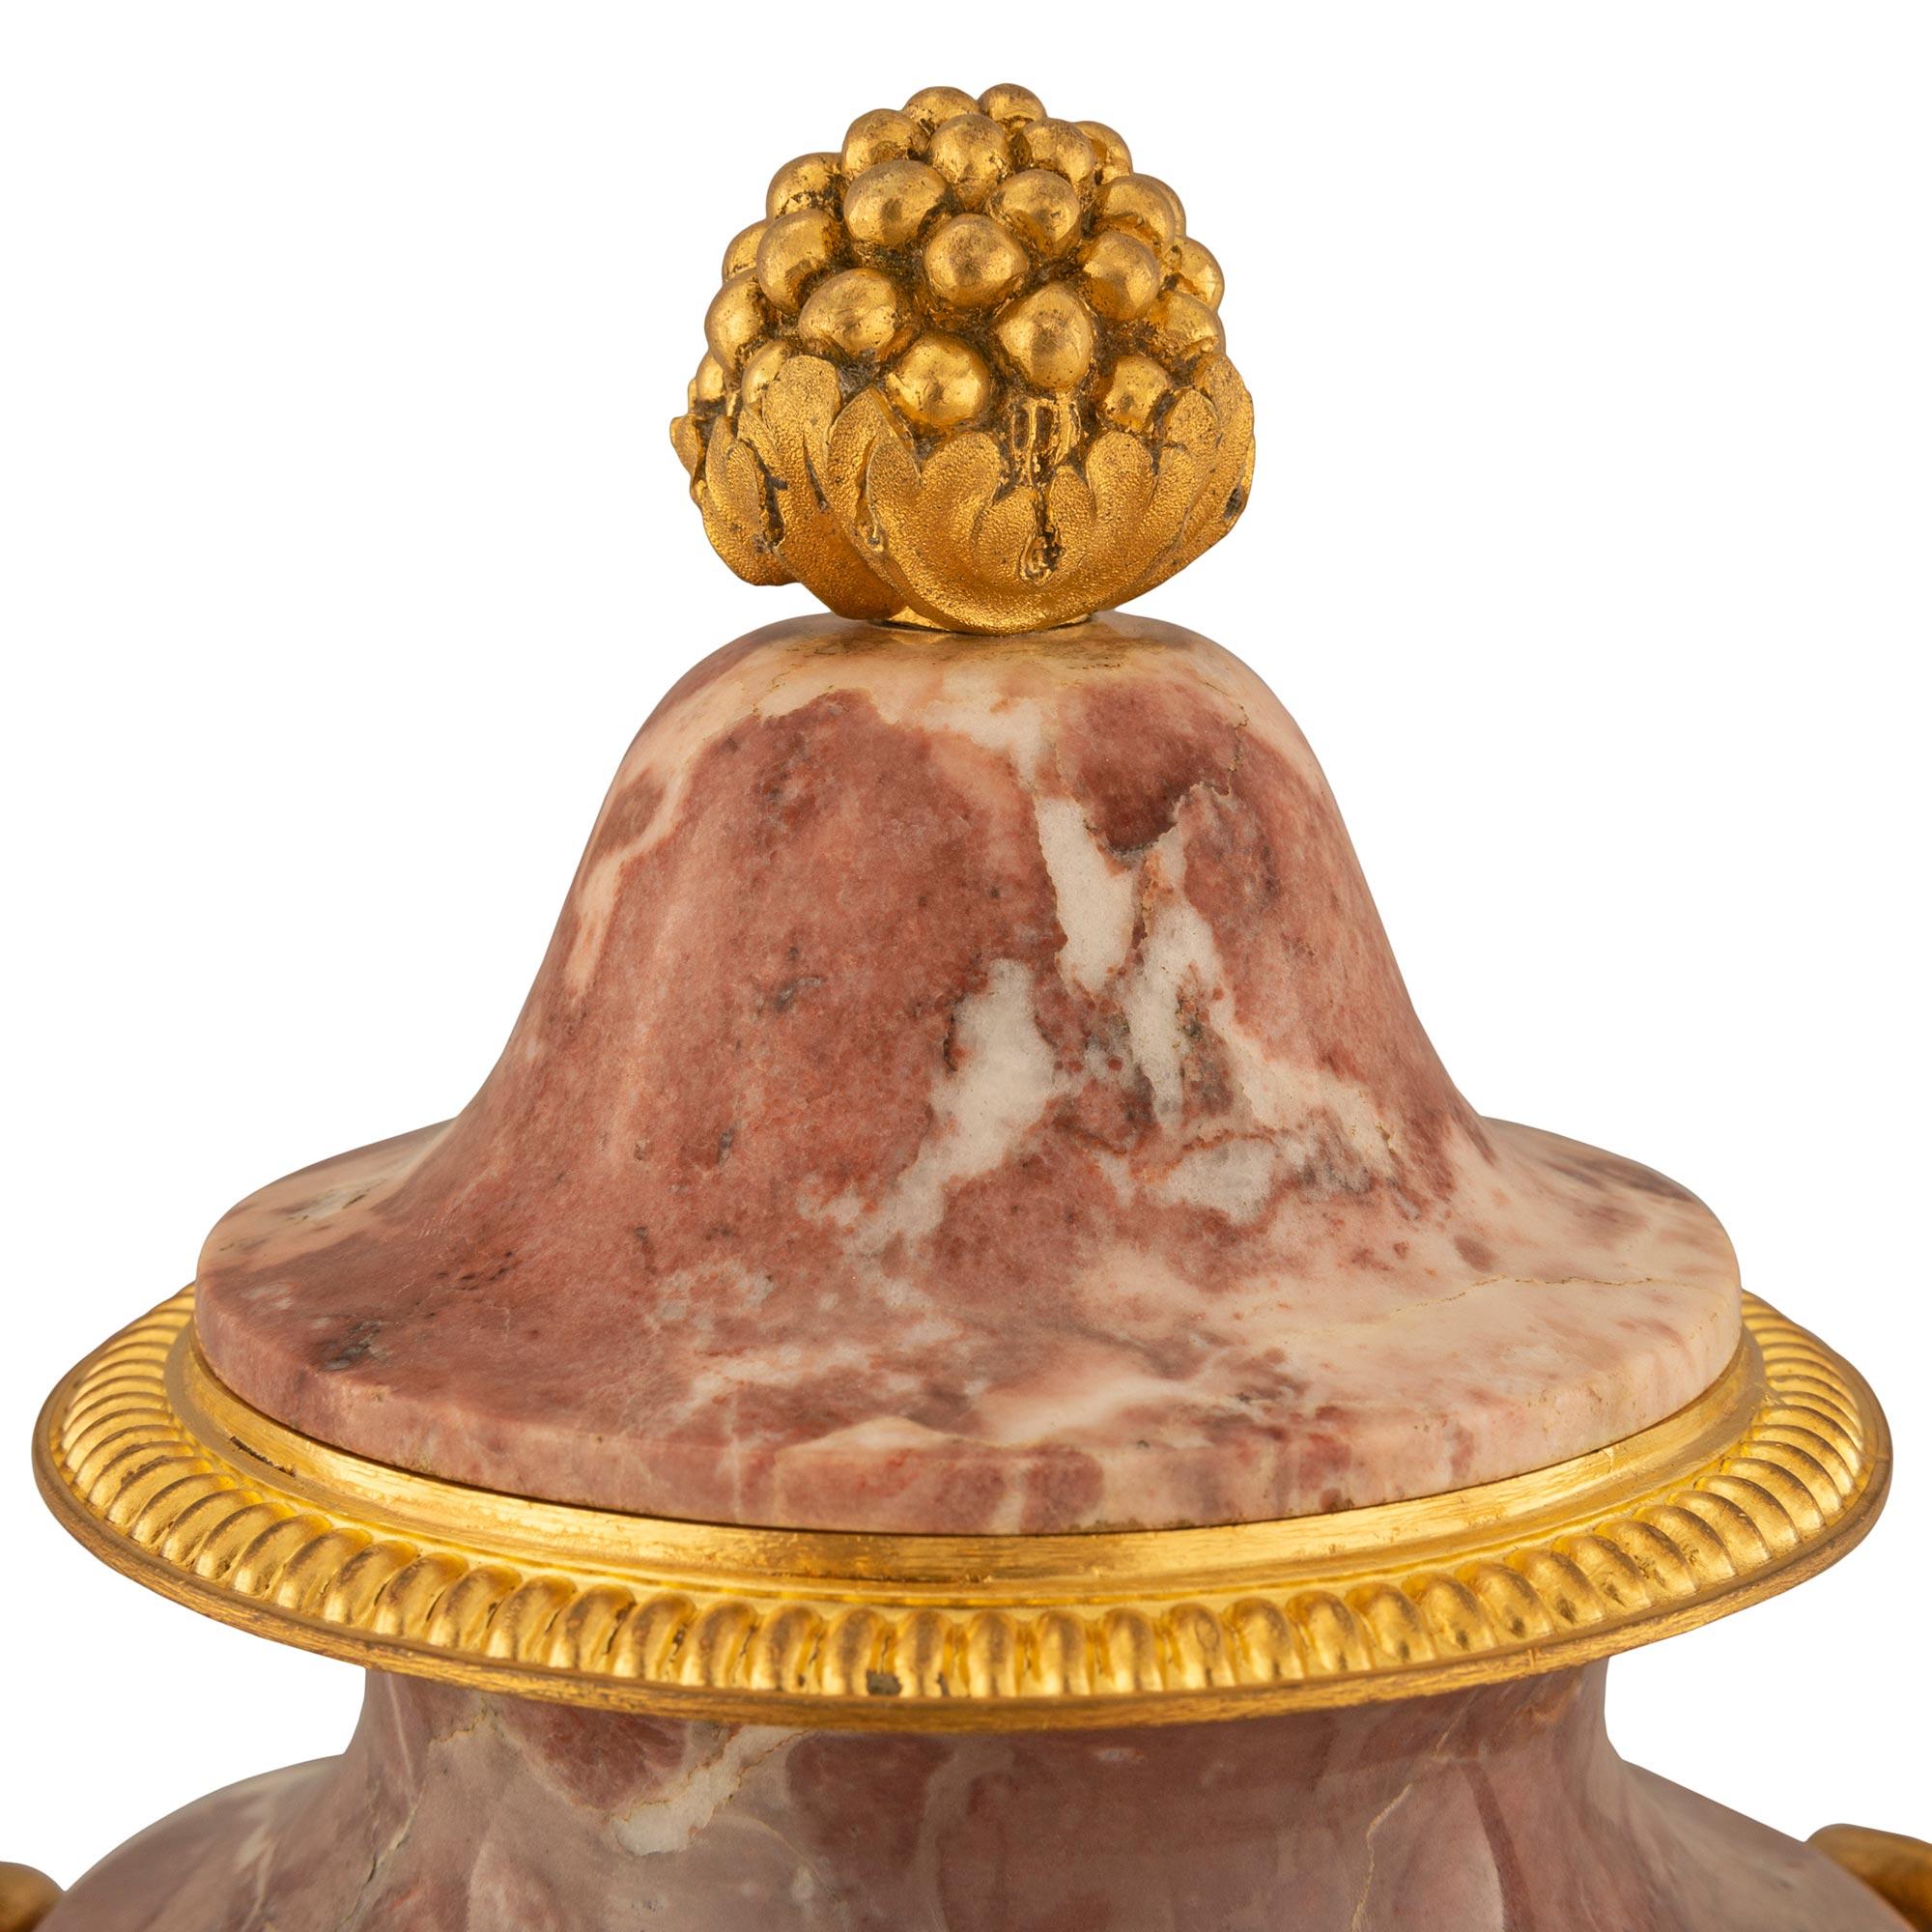 Pair of French 19th Century Louis XVI St. Brèche Violette Marble and Ormolu Urns For Sale 2